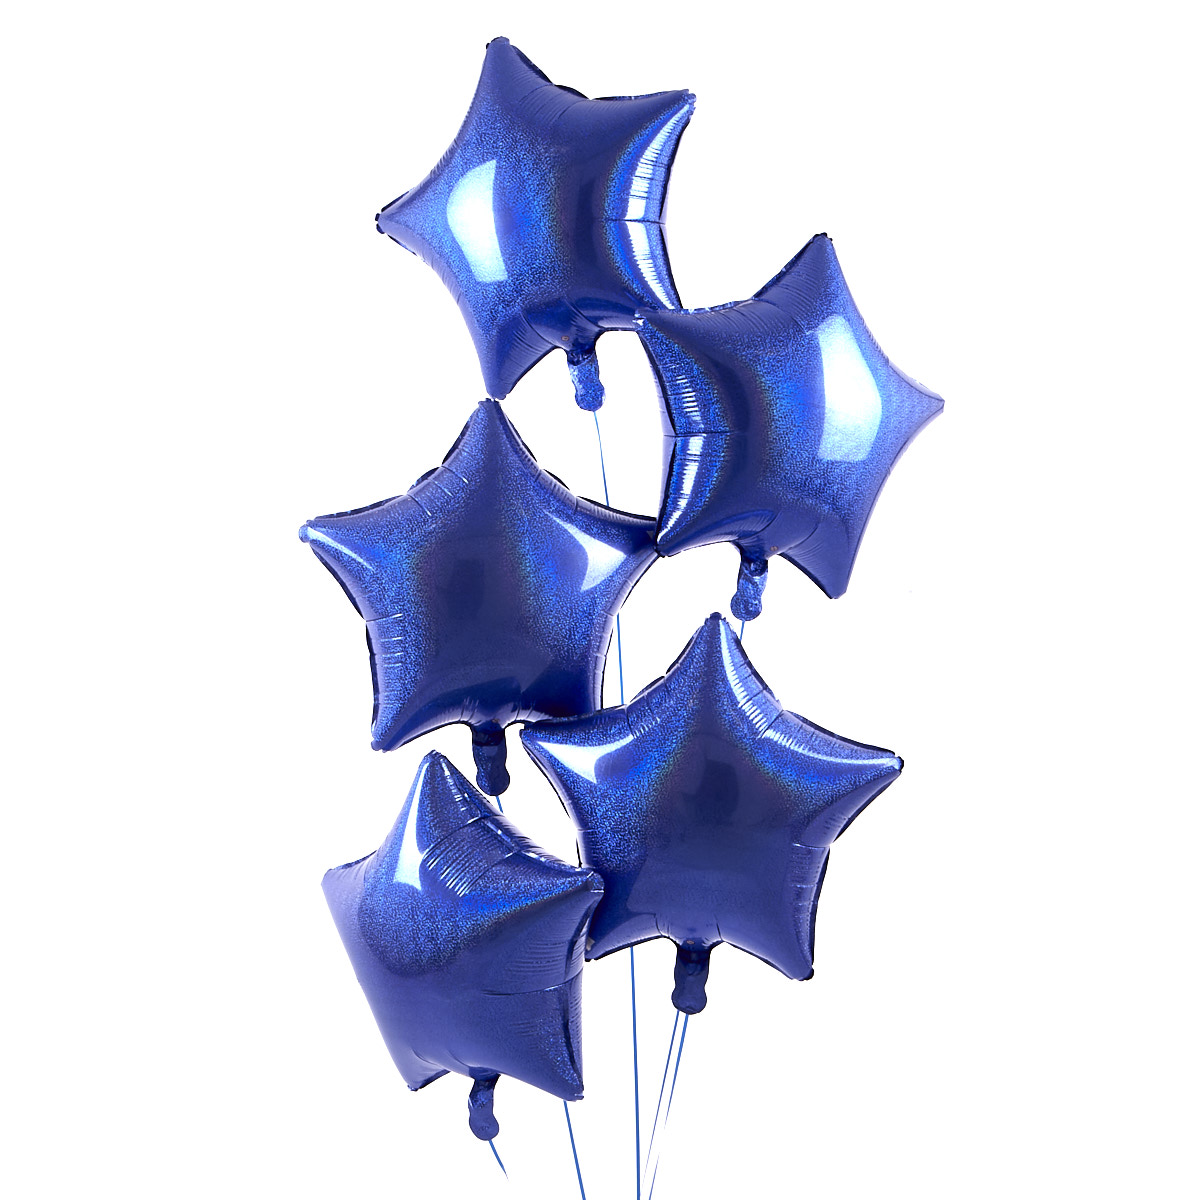 5 Royal Blue Stars Balloon Bouquet - DELIVERED INFLATED! 